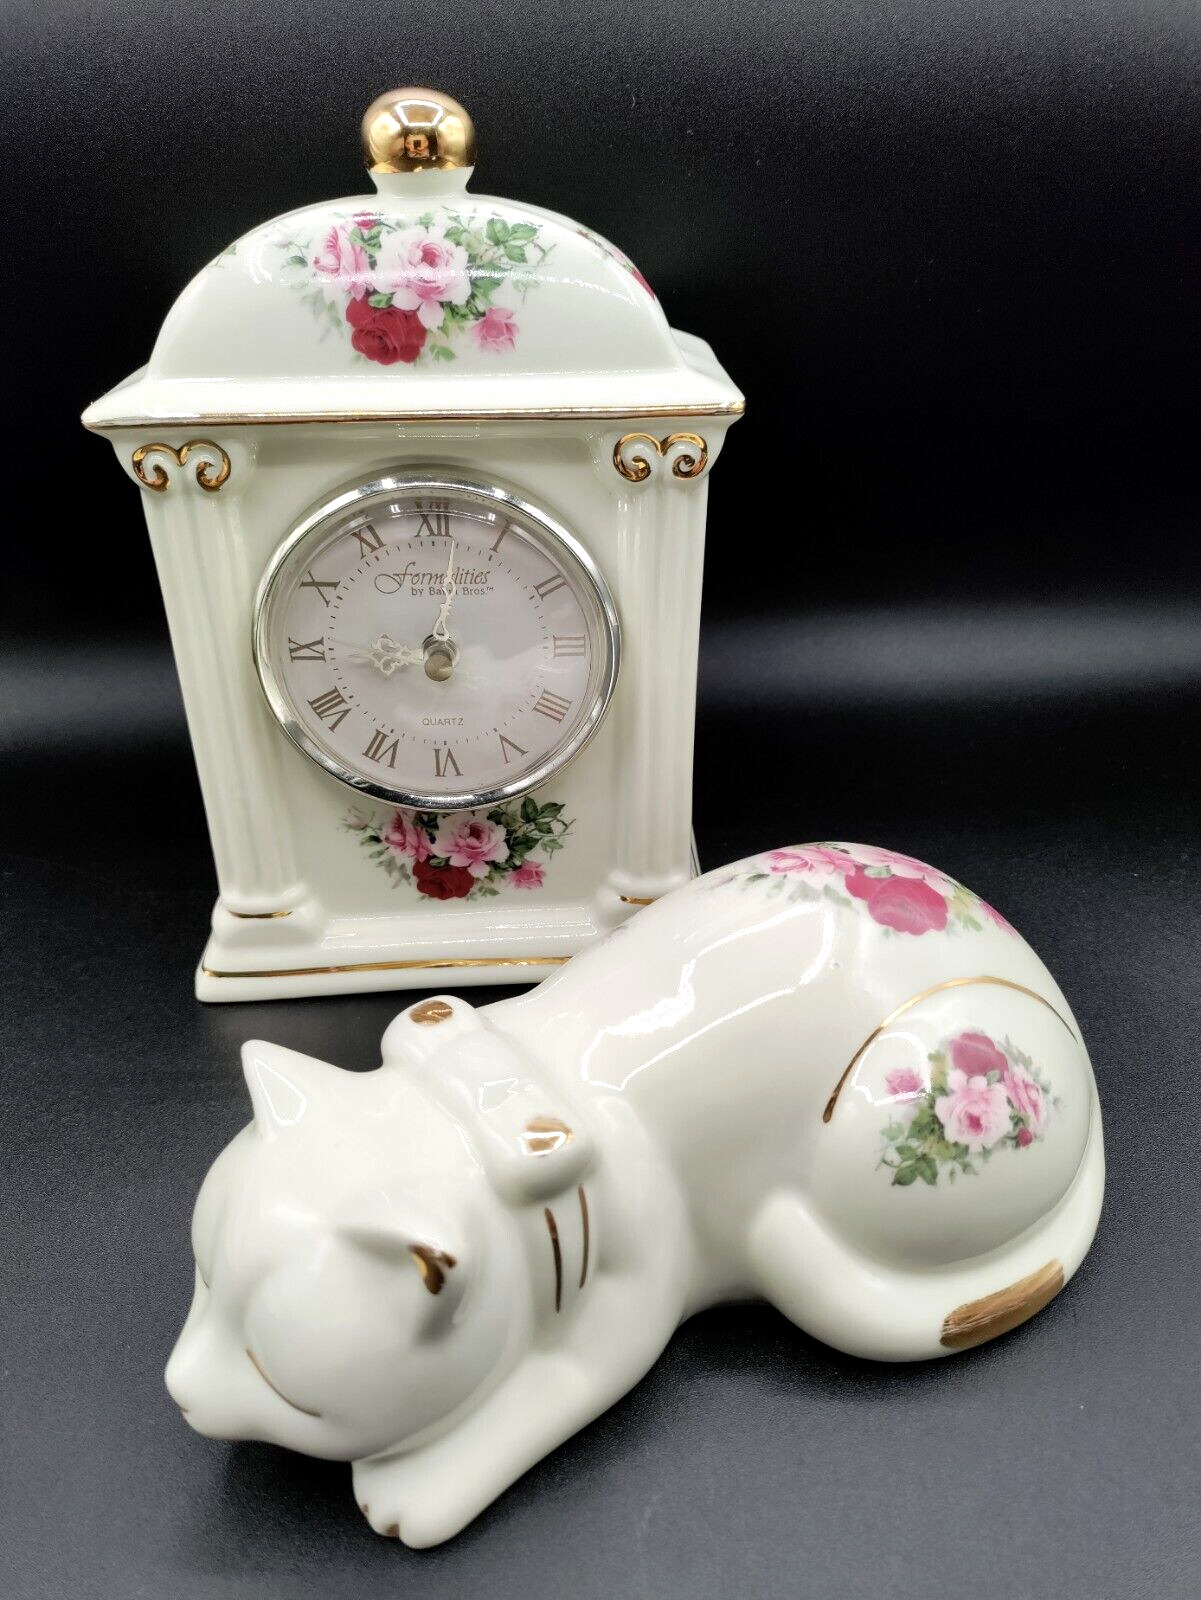 Formalities by Baum Bros Mantle Clock and Cat Figurine Roses and Gold Accents